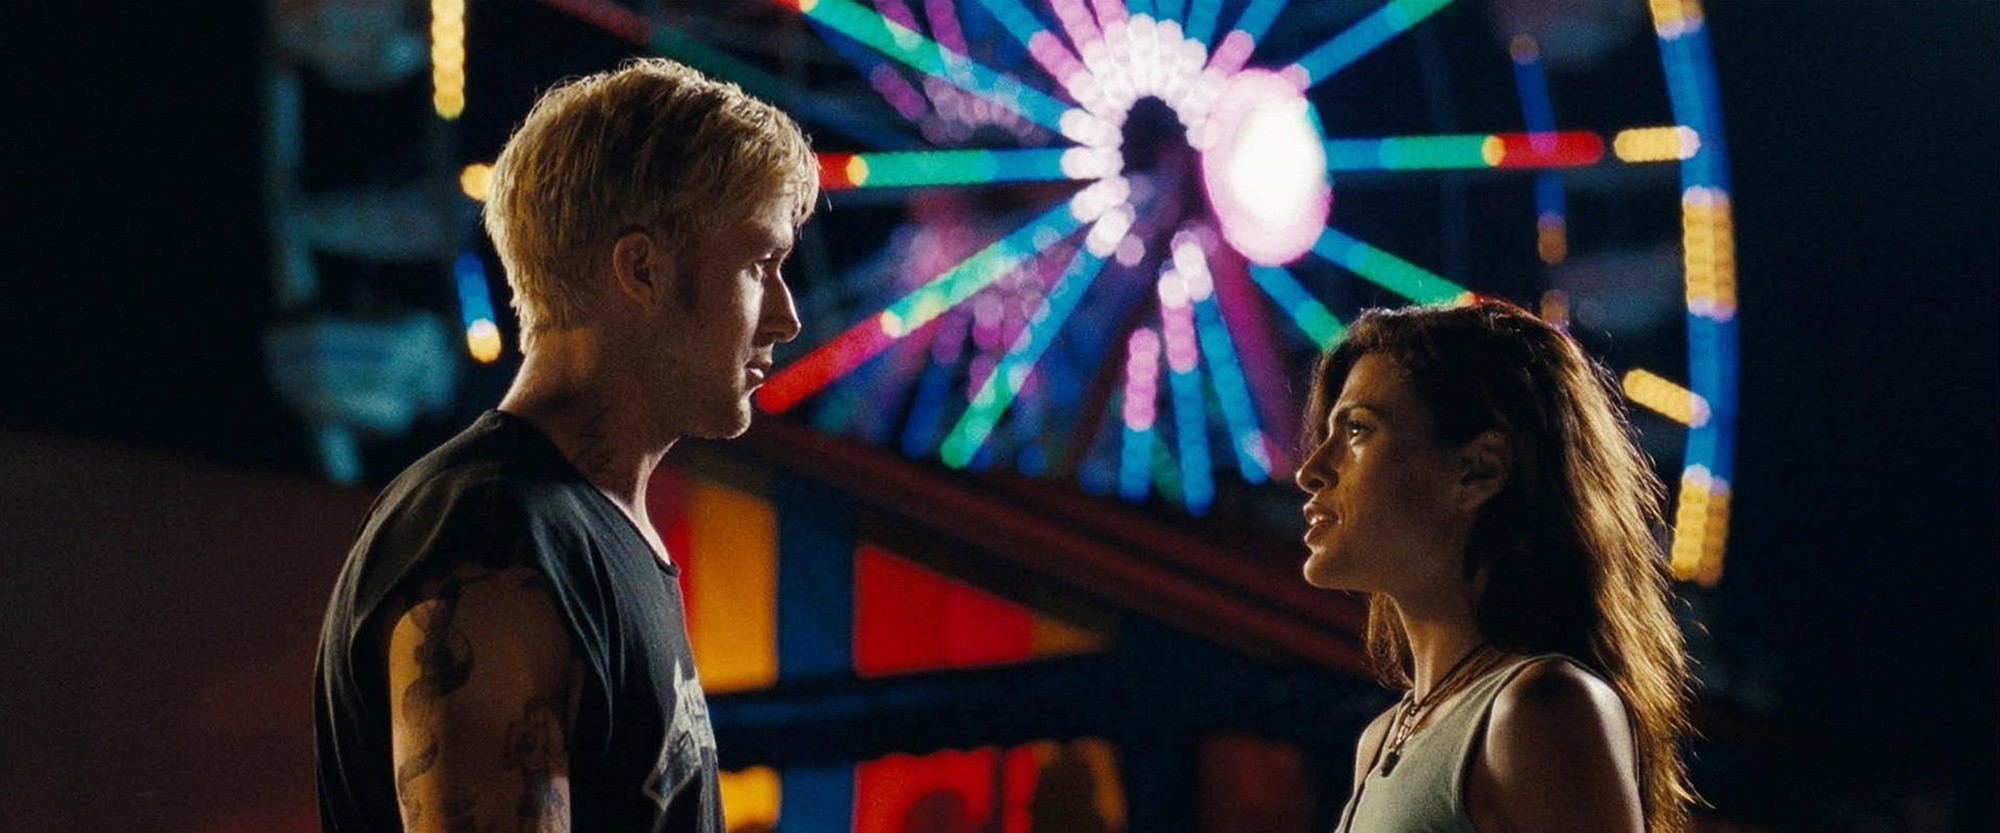 Ryan Gosling stars as Luke and Eva Mendes stars as Romina in Focus Features' The Place Beyond the Pines (2013). Photo credit by Atsushi Nishijima.